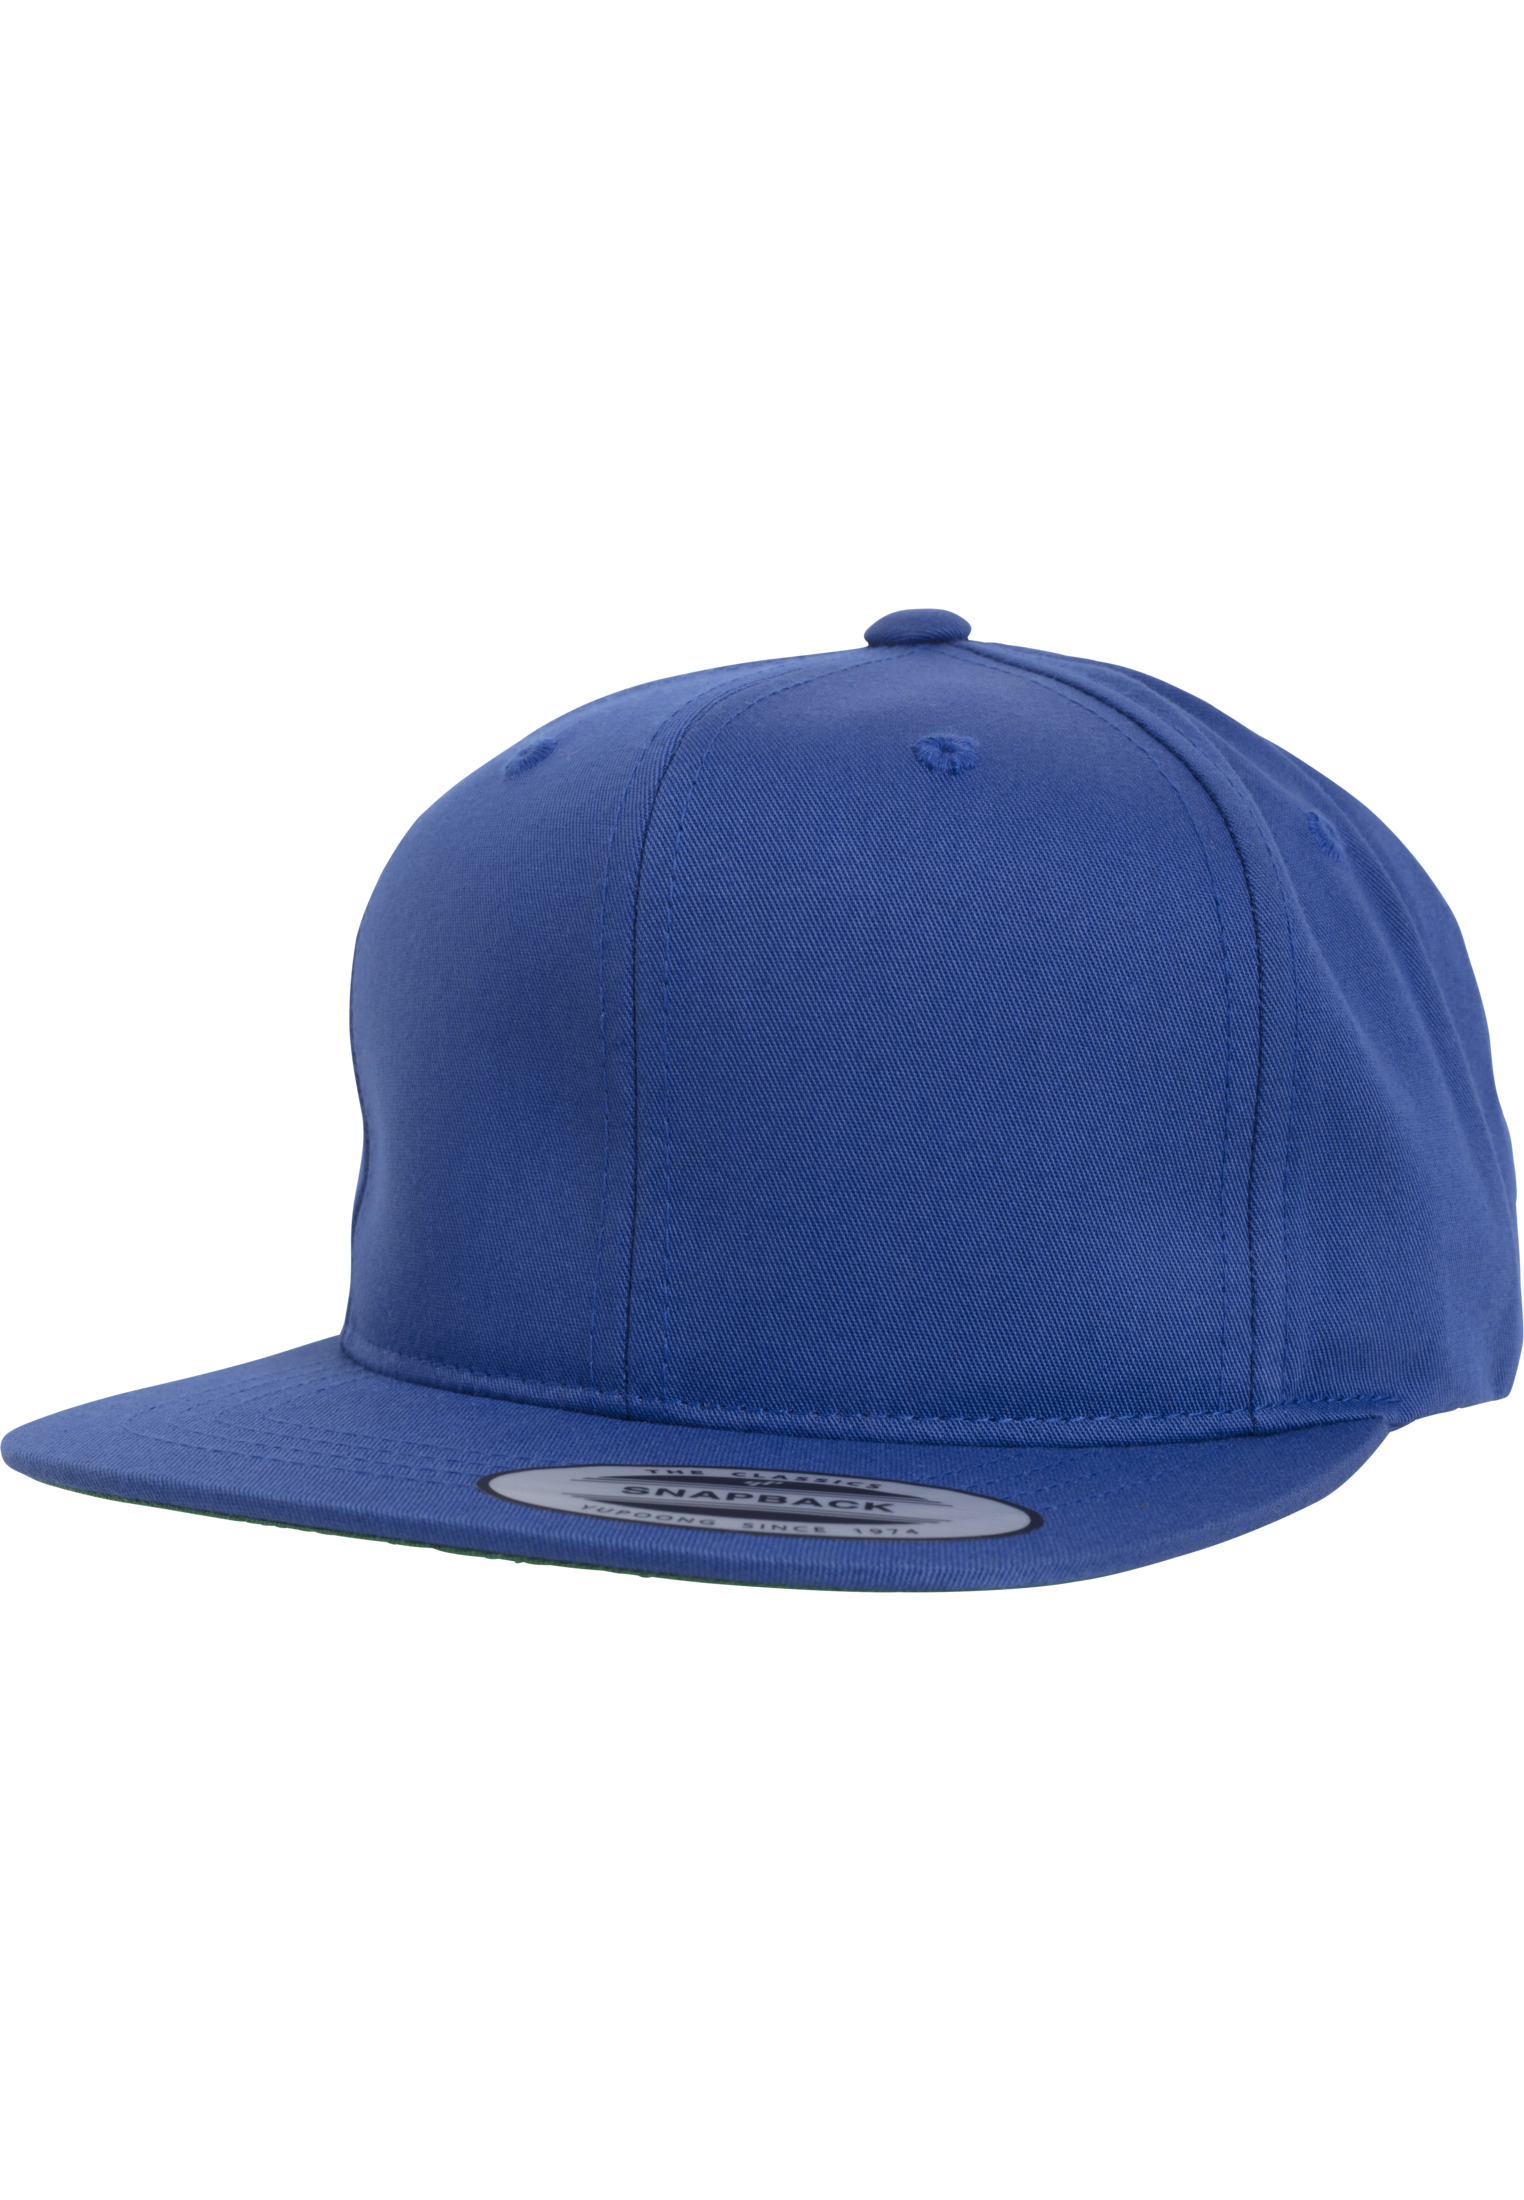 Kids Pro-Style Twill Snapback Youth Cap in Farbe royal